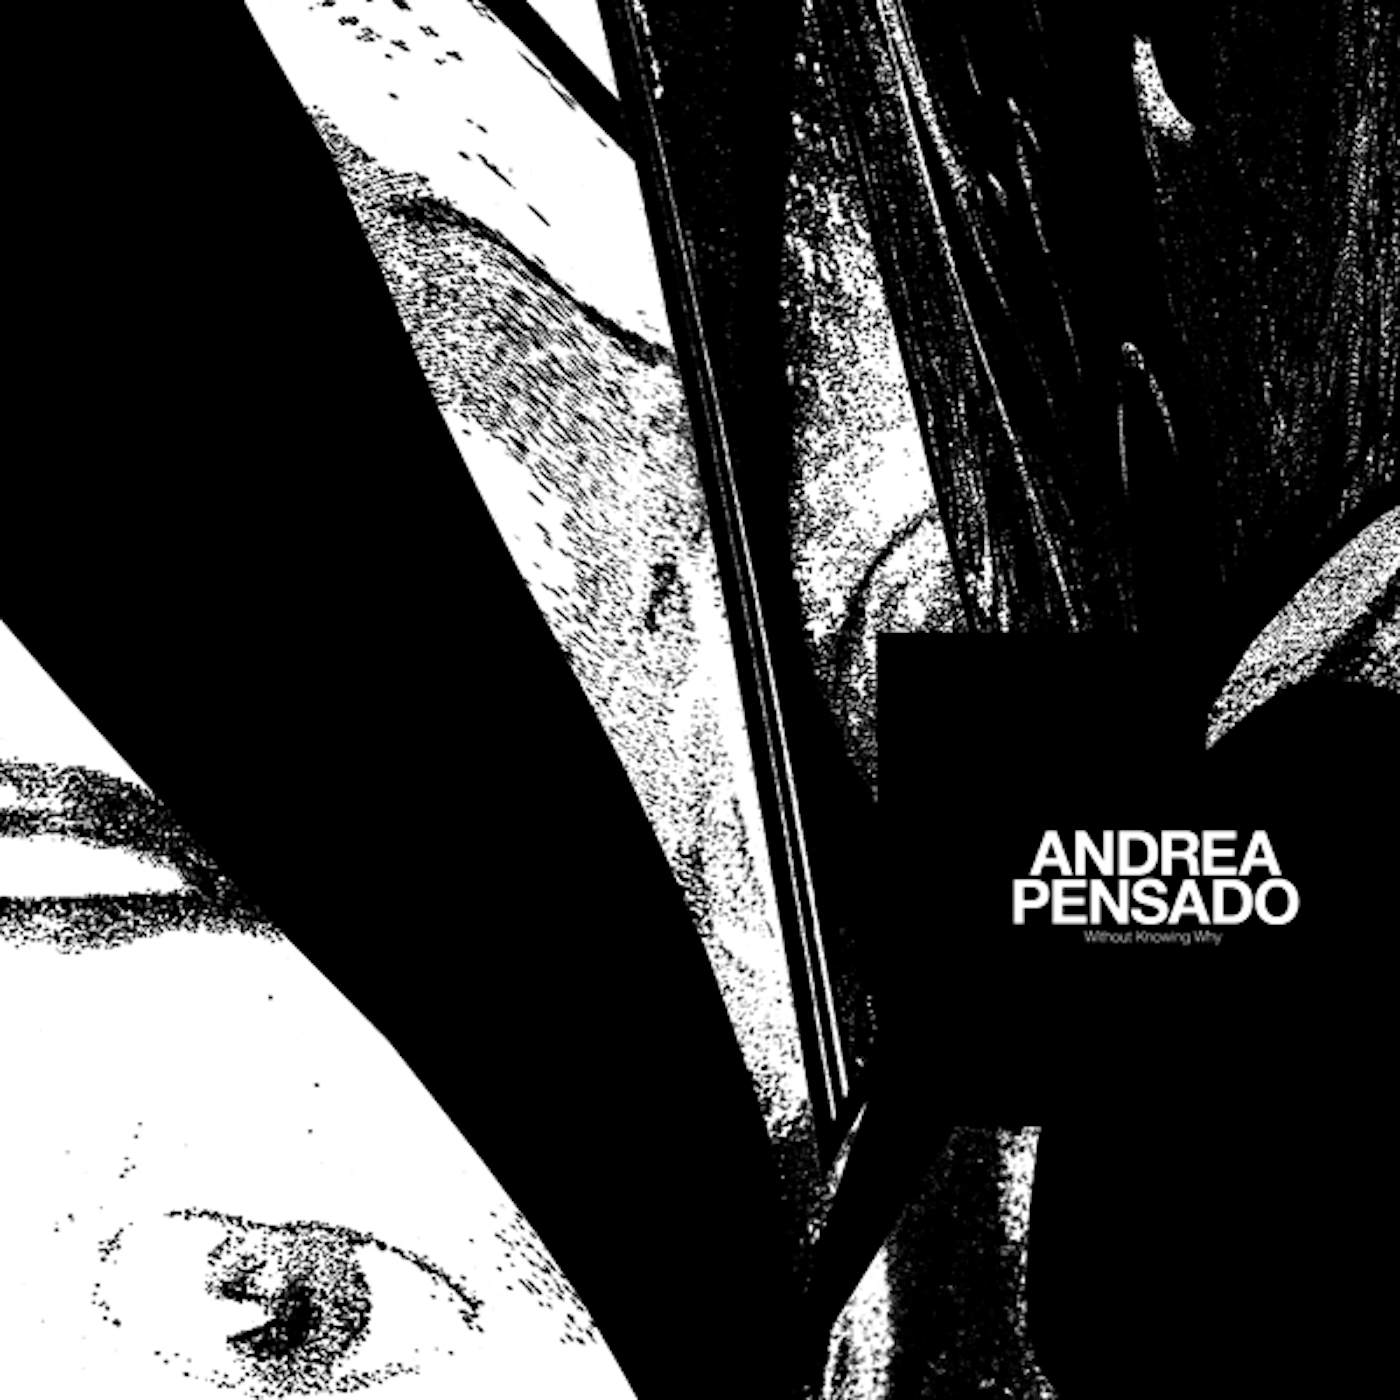 Andrea Pensado Without Knowing Why Vinyl Record